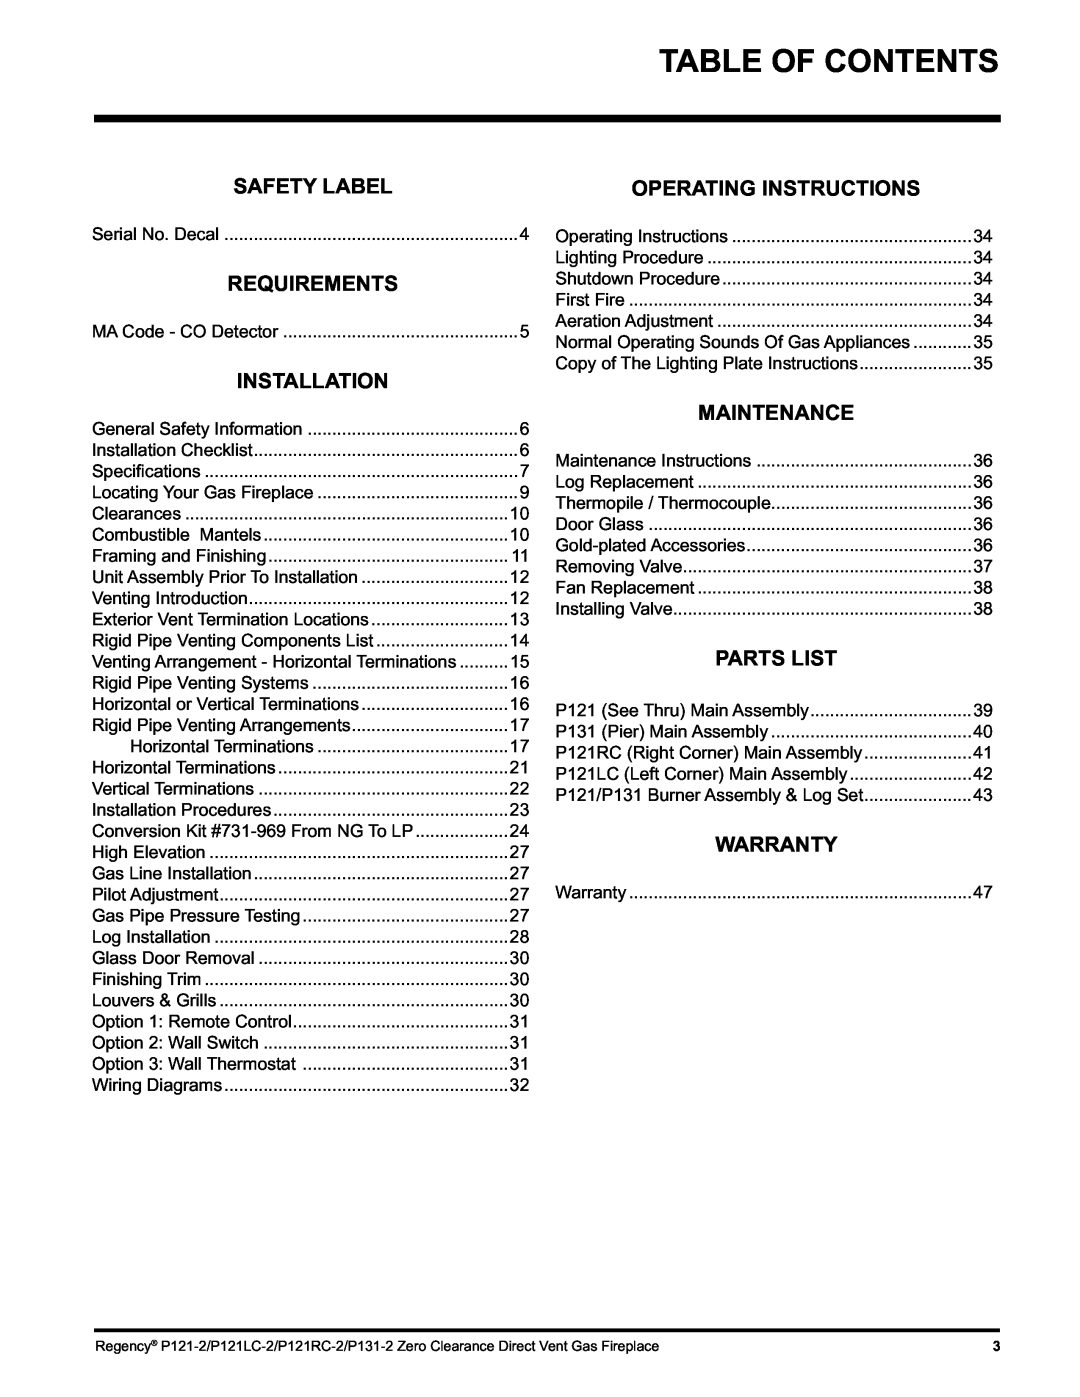 Regency P131, P121 Safety Label, Requirements, Installation, Maintenance, Parts List, Warranty, Operating Instructions 